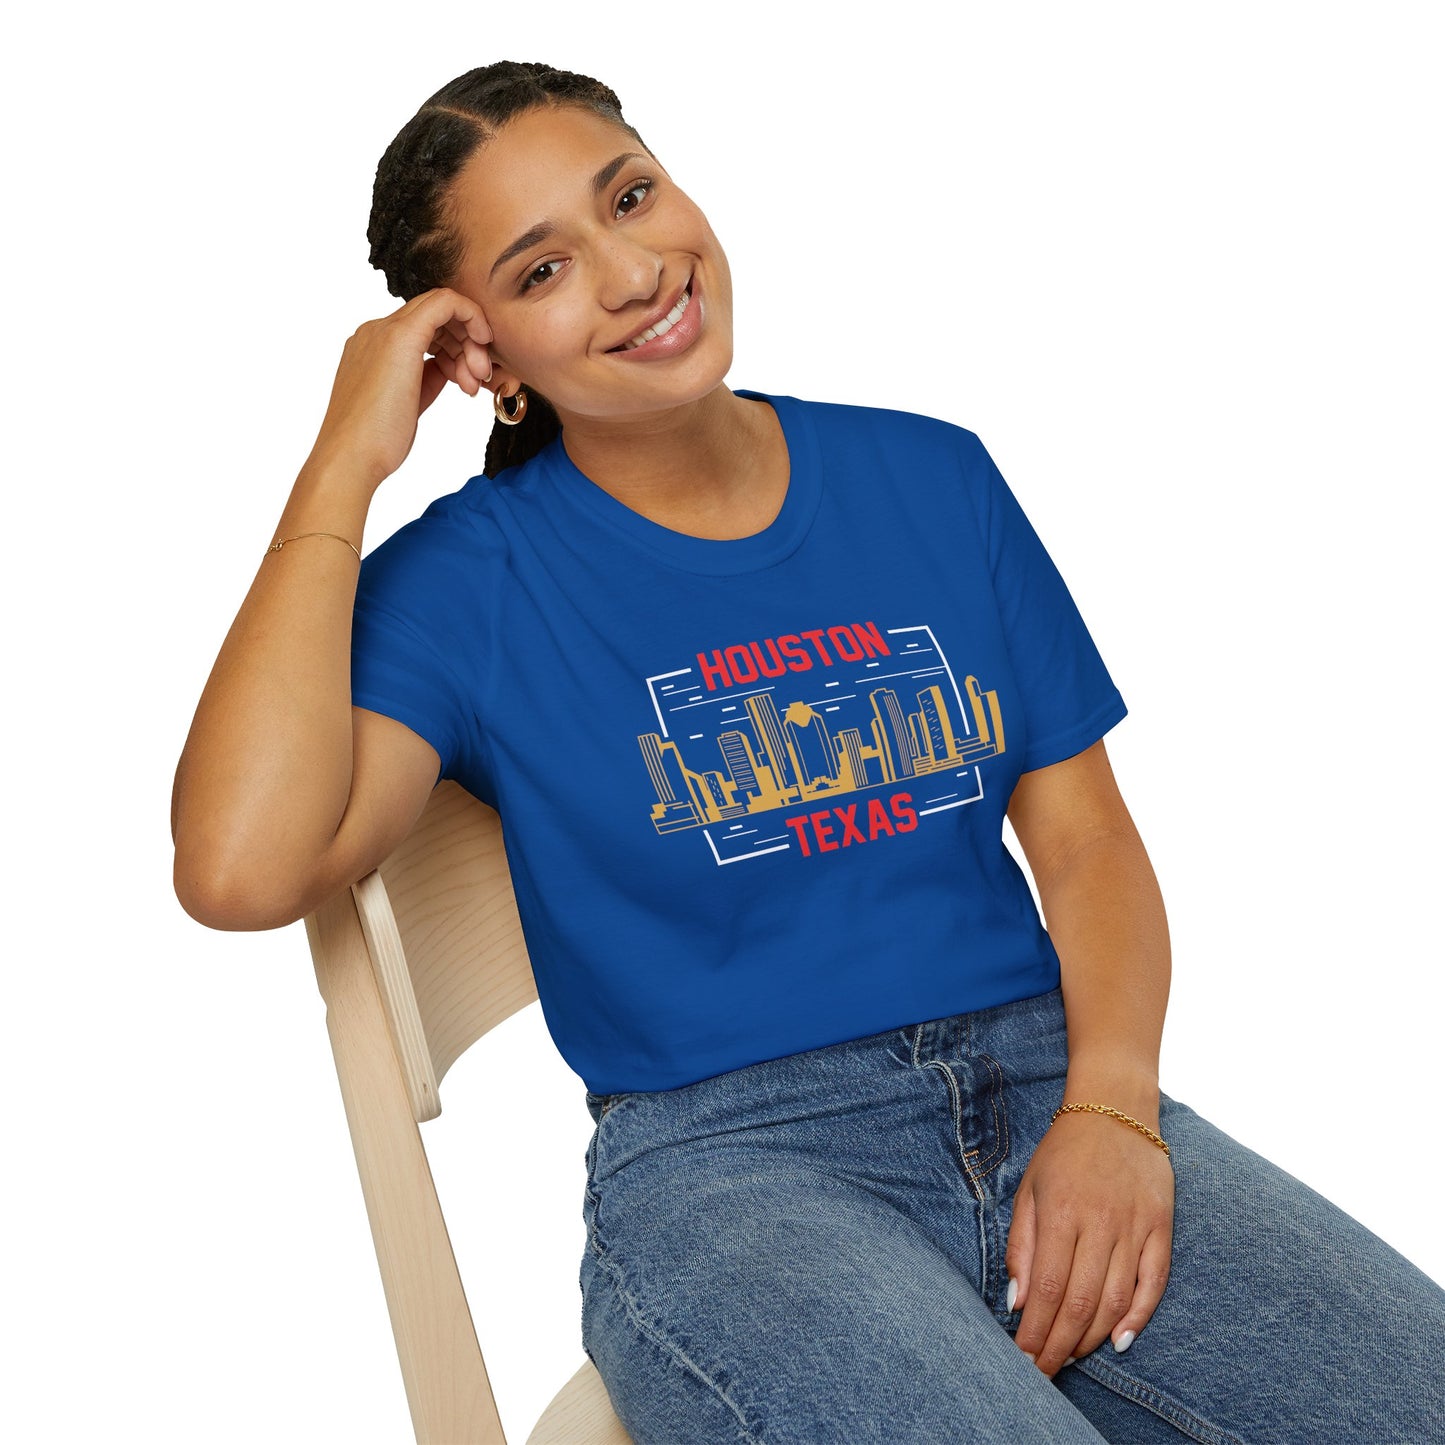 Houston Vibes: Stylish and Comfortable T-shirt to Flaunt Your Texan Pride!